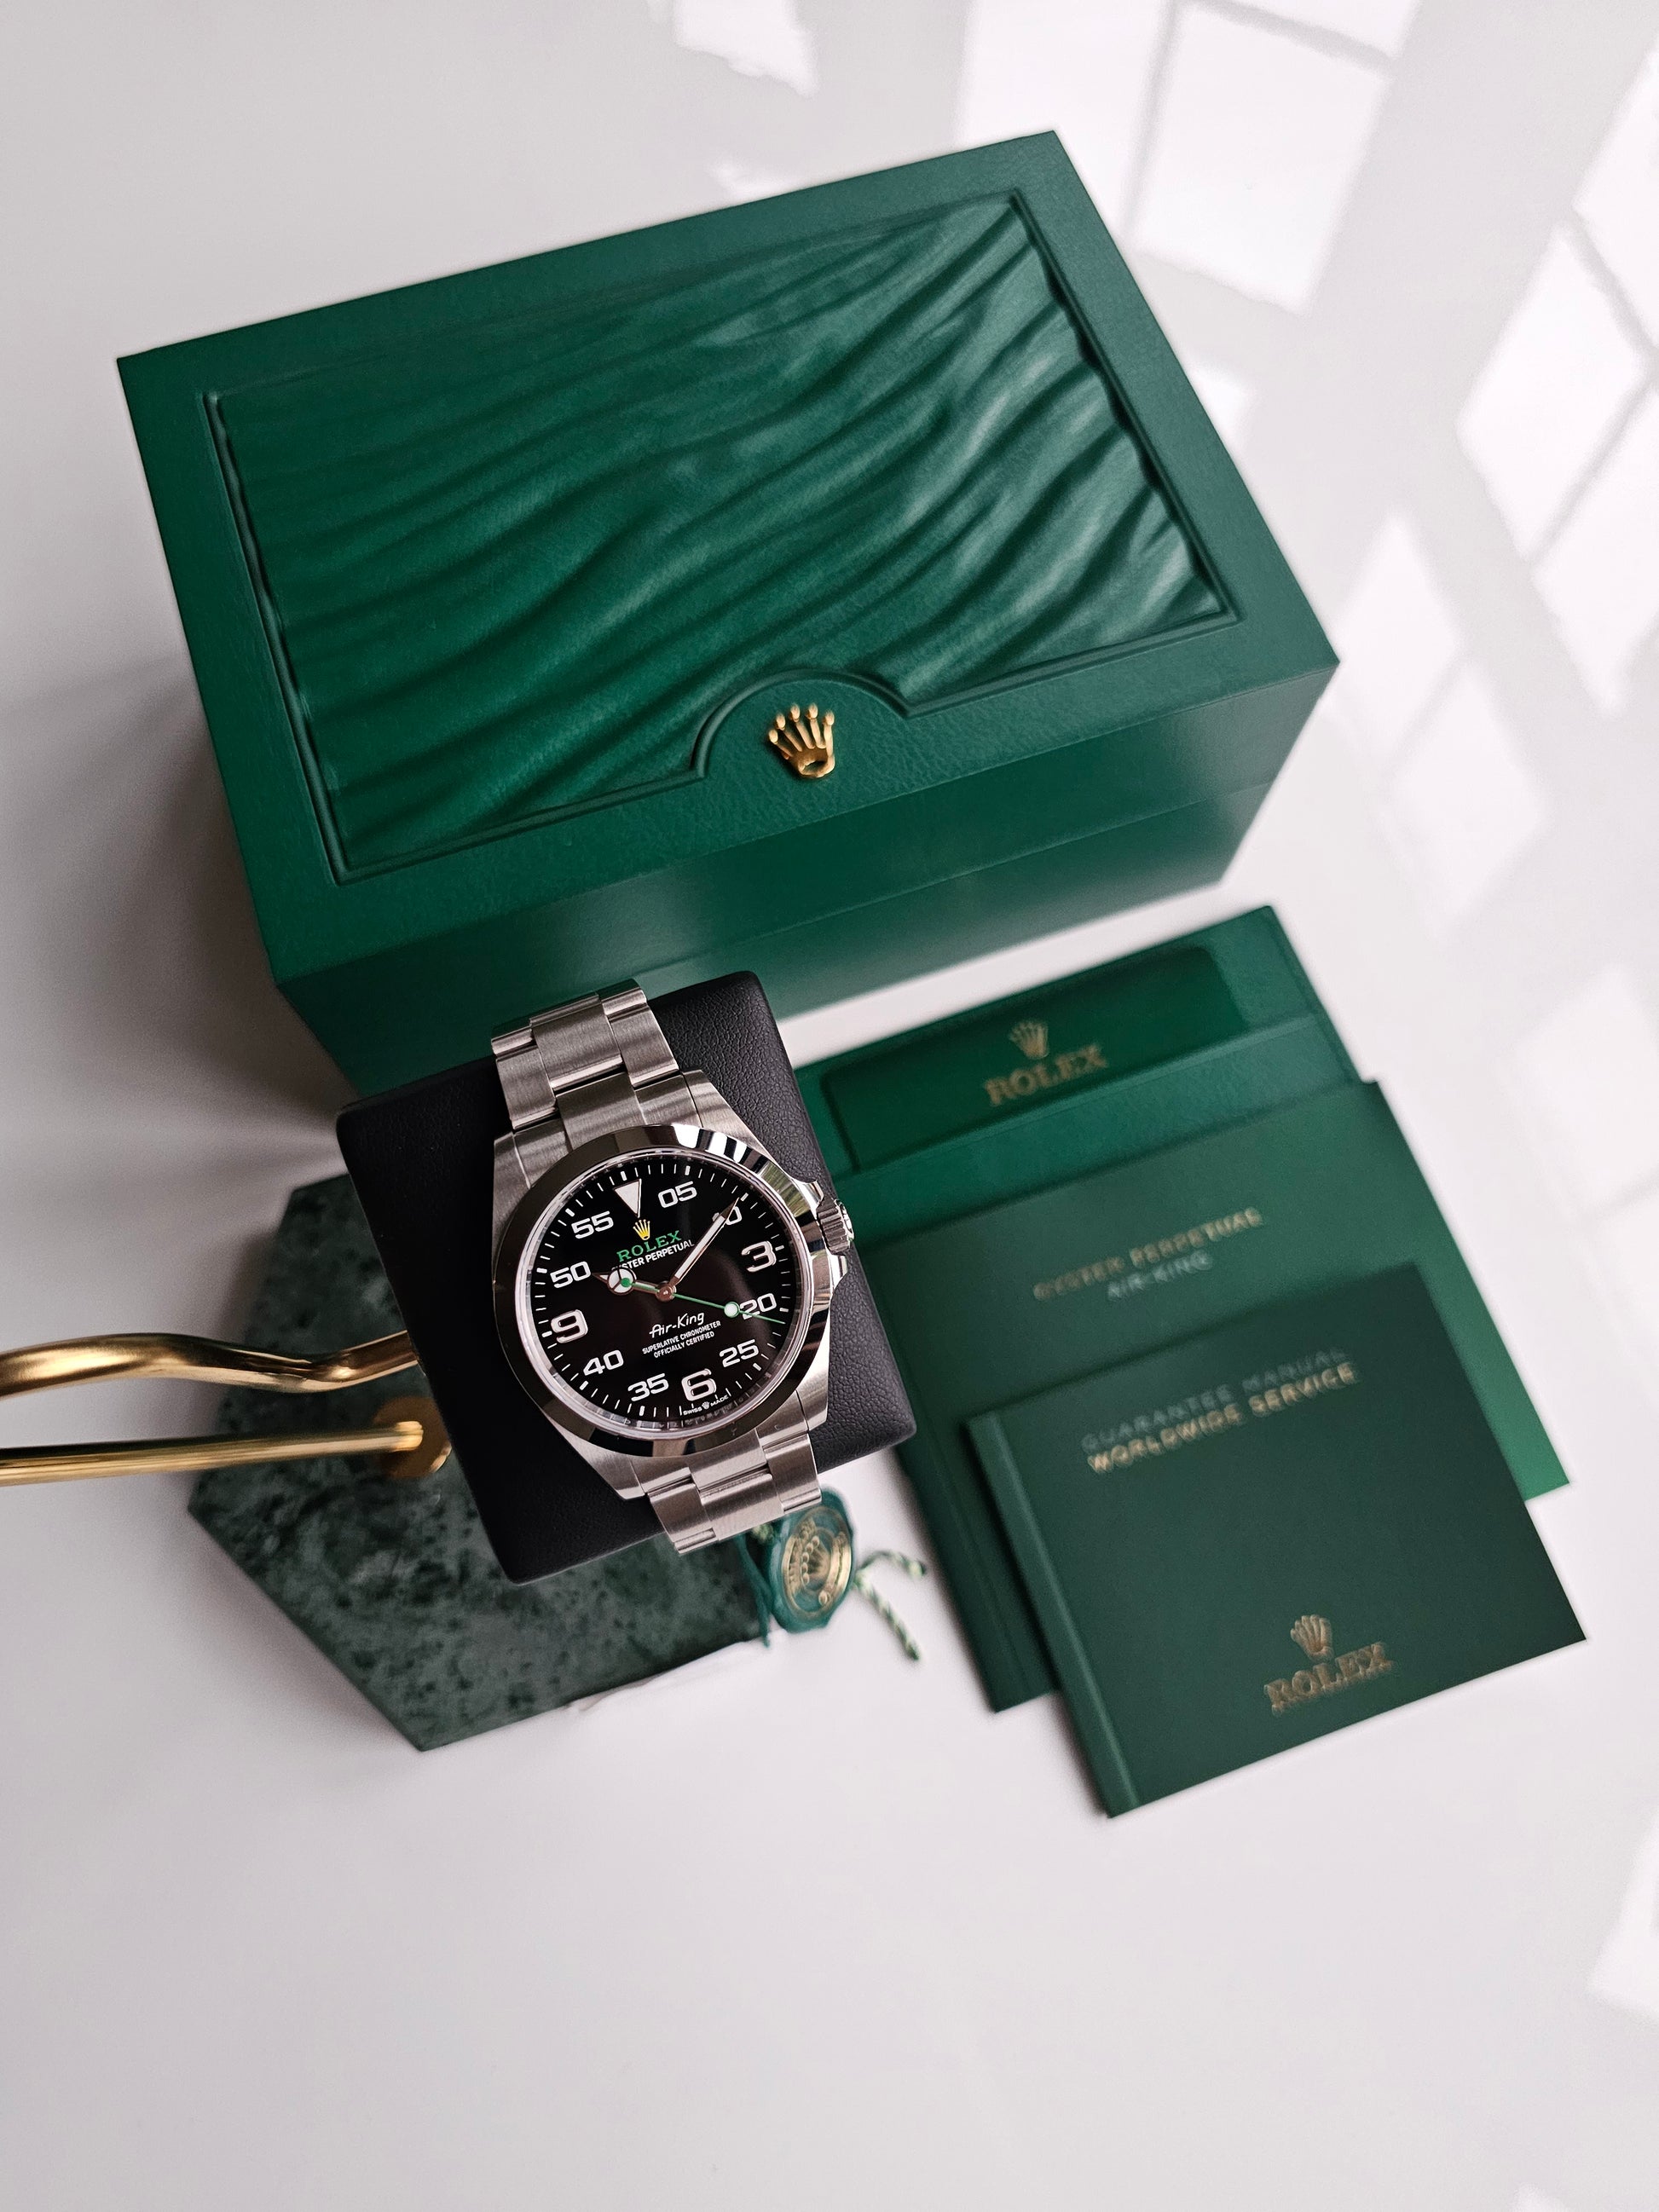 Rolex Airking 126900, Watch is displayed on a green watch stand, box and warranty documents are displayed